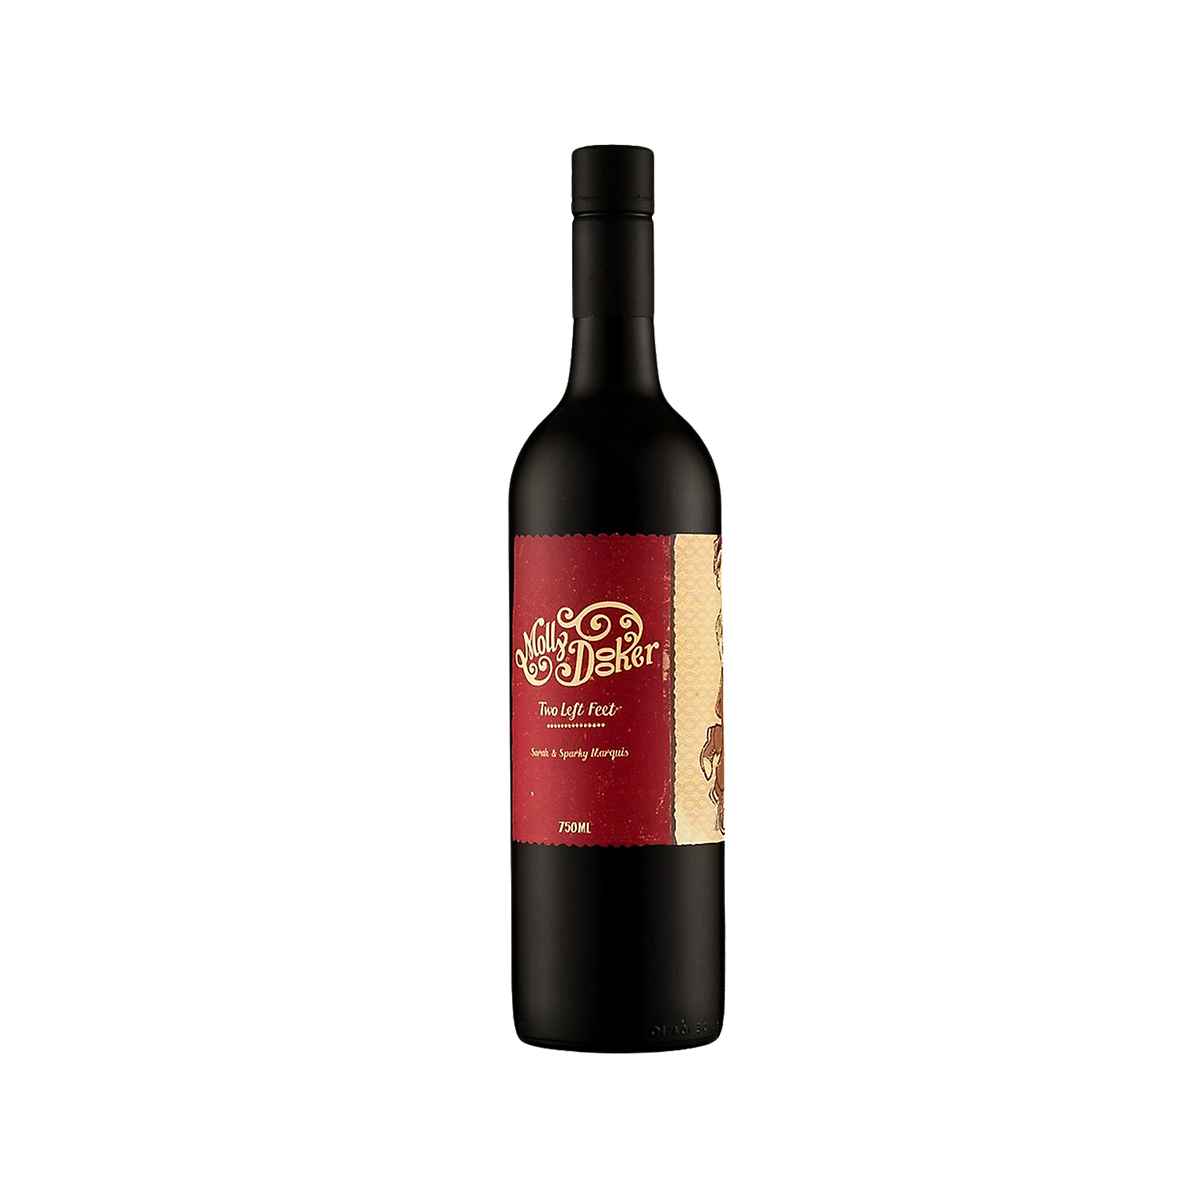 Mollydooker Red Wine Two Left Feet South Australia 2021 750Ml